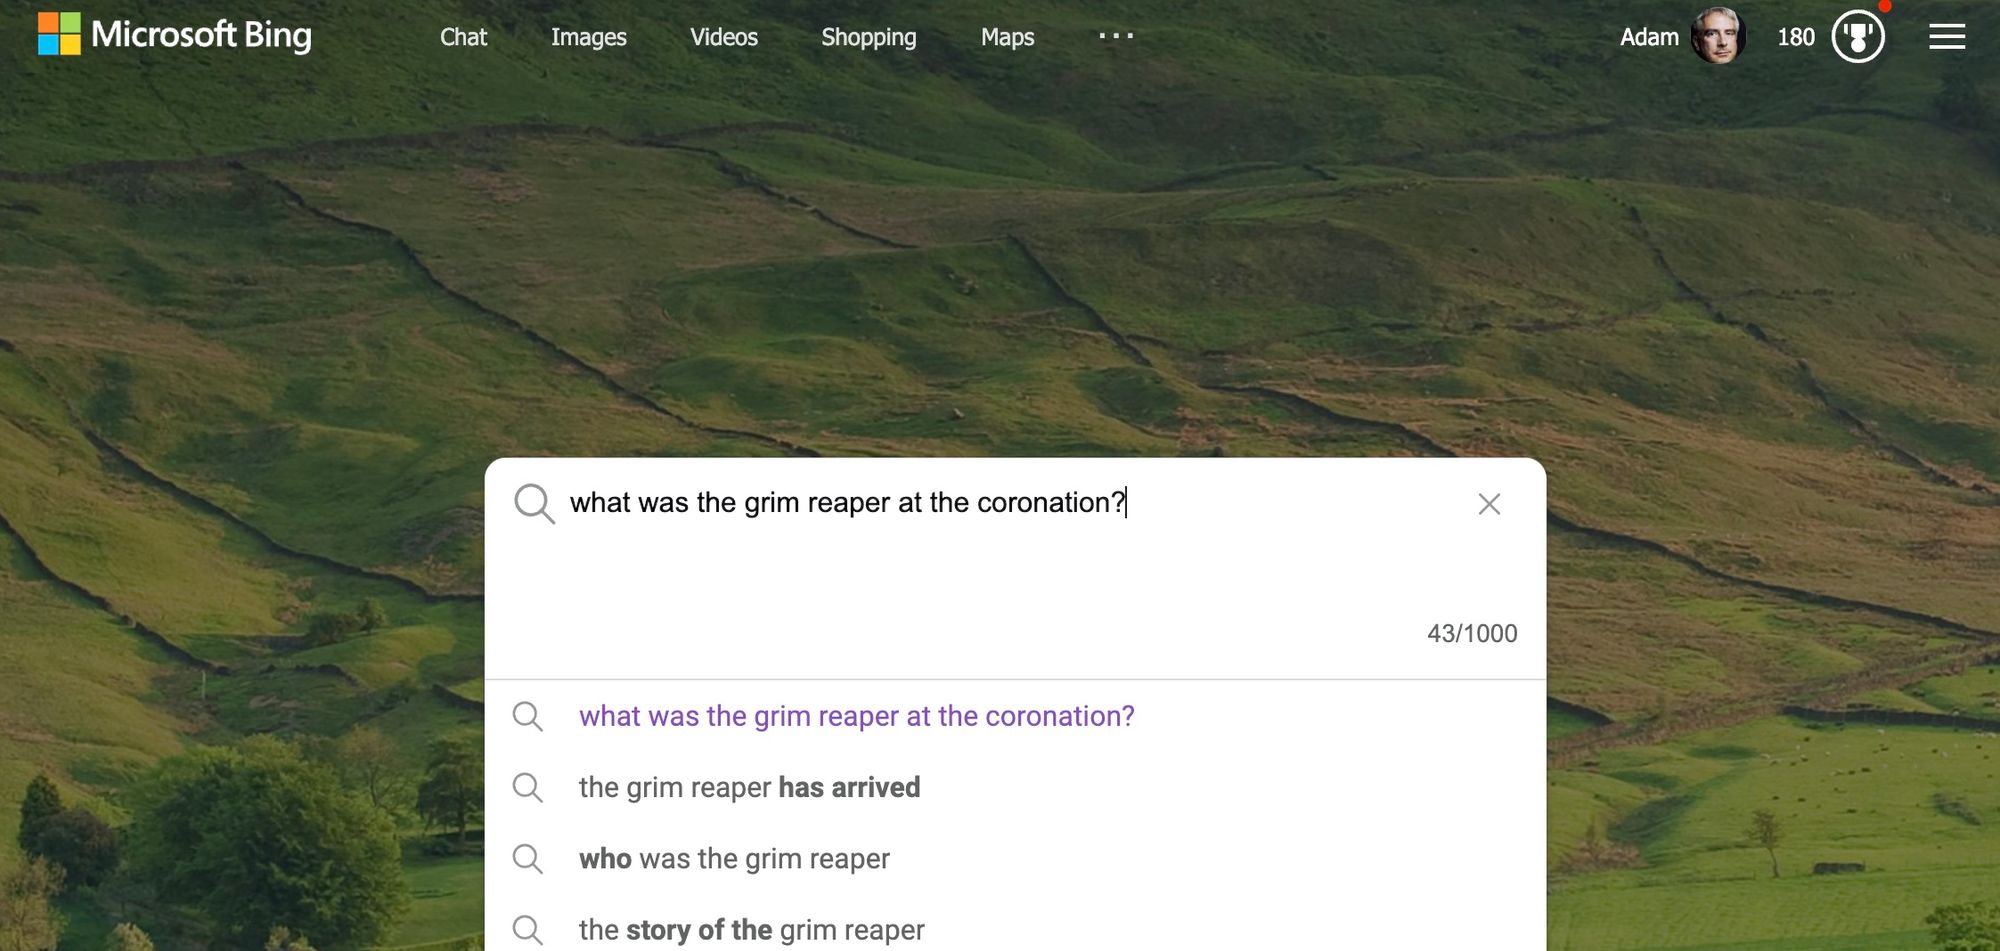 A Bing search for the grim reaper at the coronation